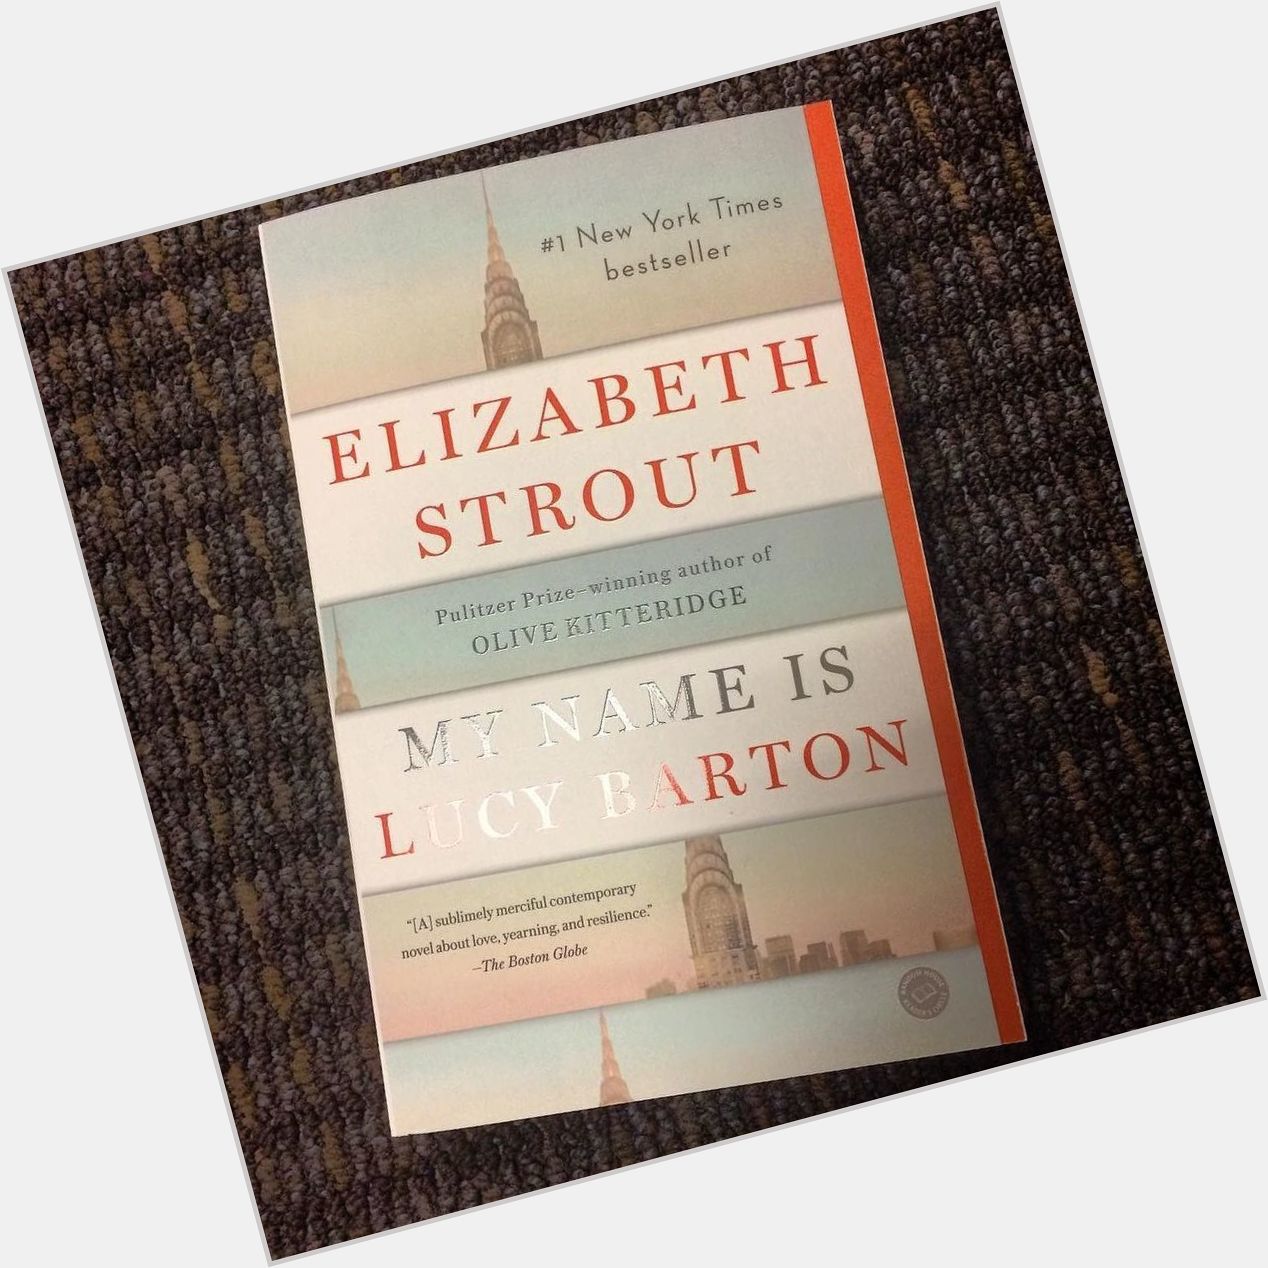 Happy 60th birthday Elizabeth Strout! The Pulitzer Prize winning author of \"Olive Kitterid 